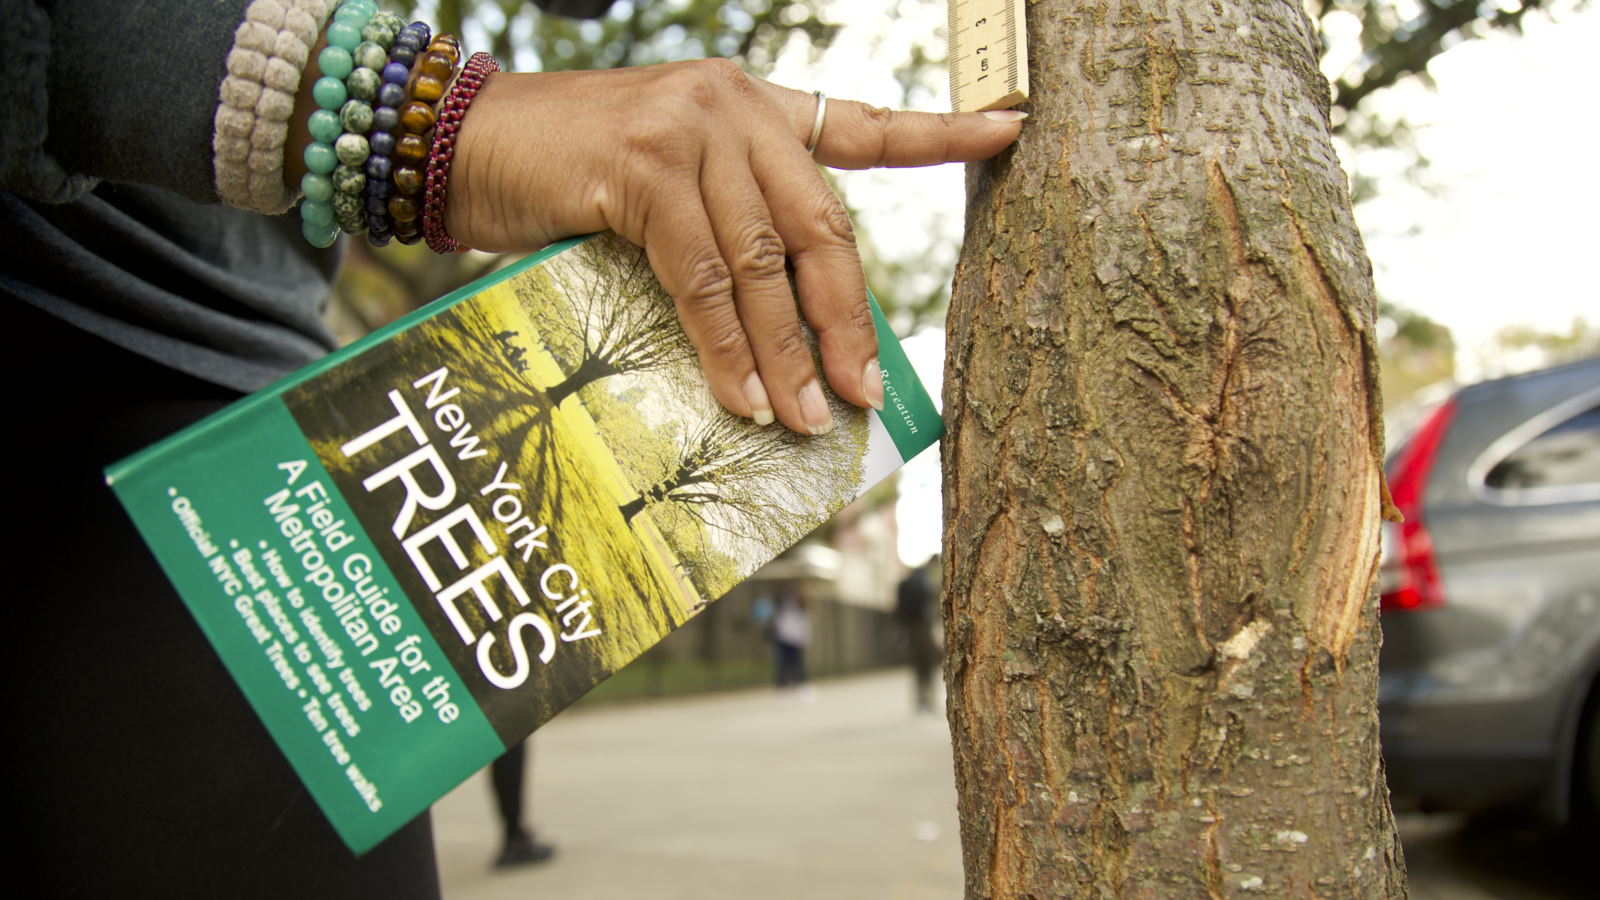 A hand holding a book called "New York City Trees" points to the bottom of a ruler at the 1cm mark. The ruler measures the length of the tree from the top.